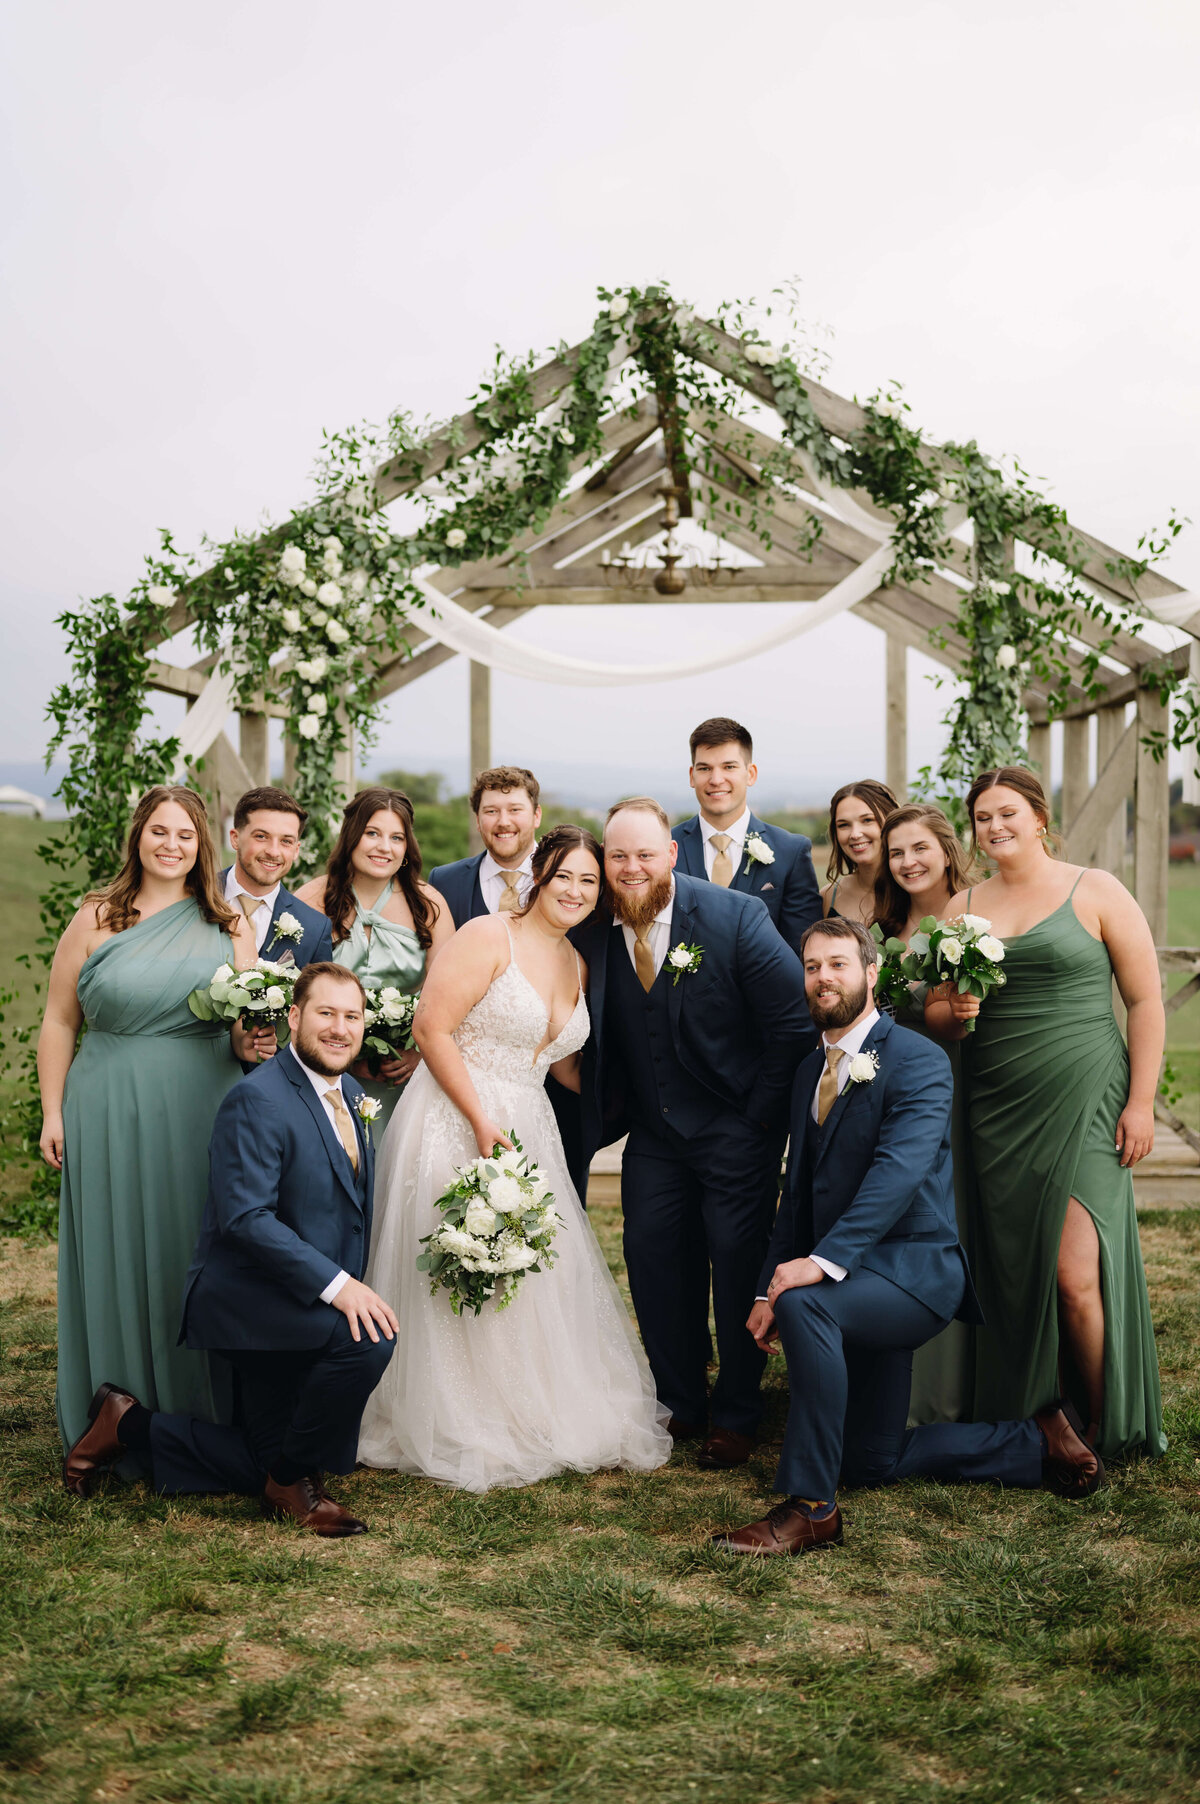 bridal party surrounds the bride and groom under a house frame decorated with florals and drapes for a Shenandoah National Park wedding